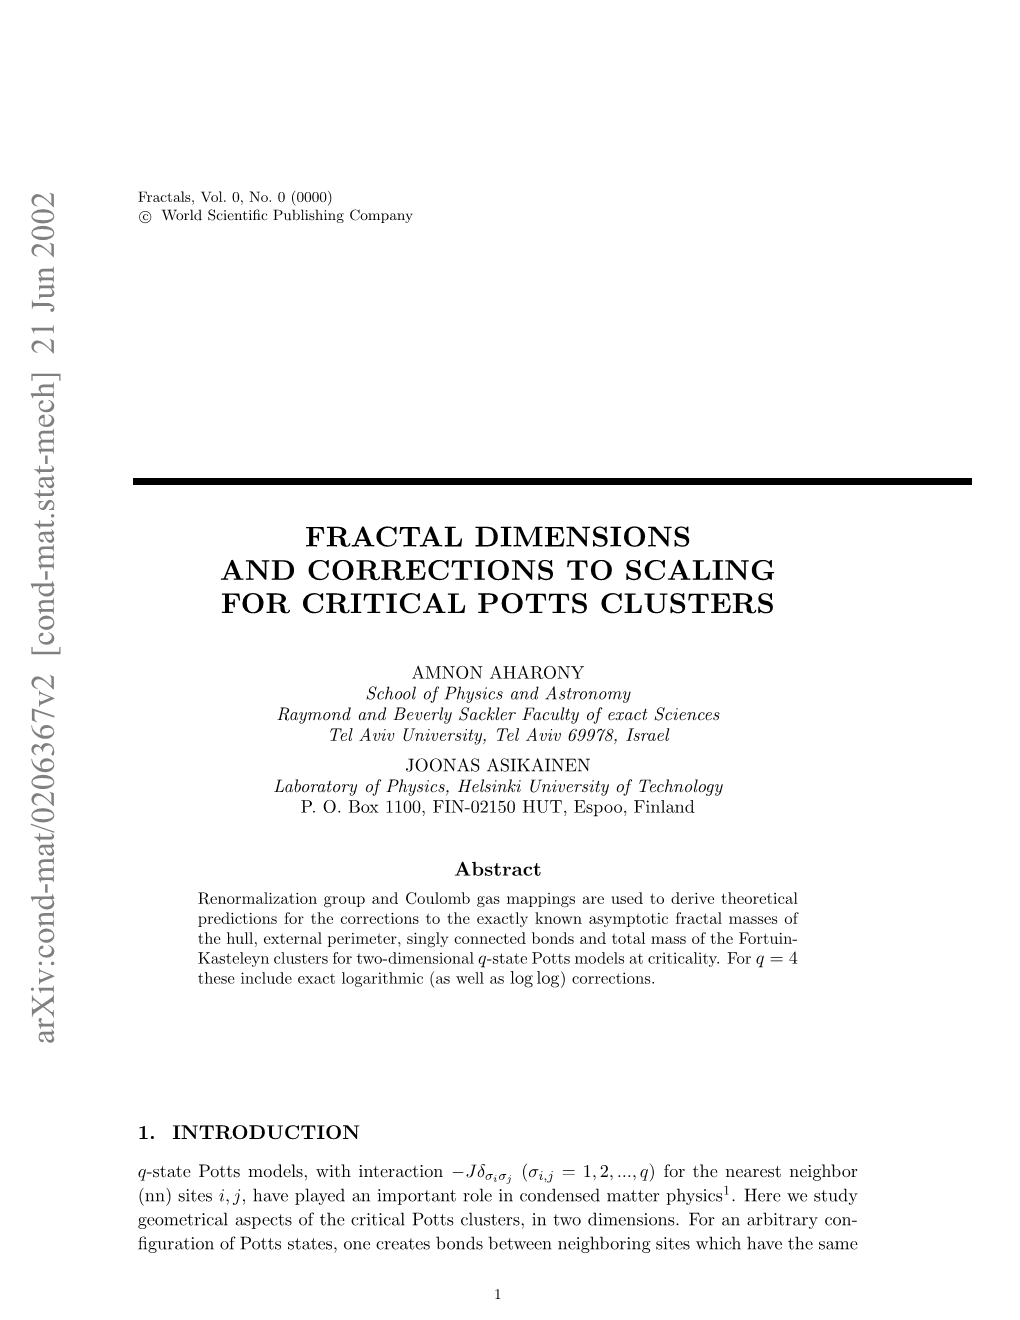 Fractal Dimensions and Corrections to Scaling for Critical Potts Clusters